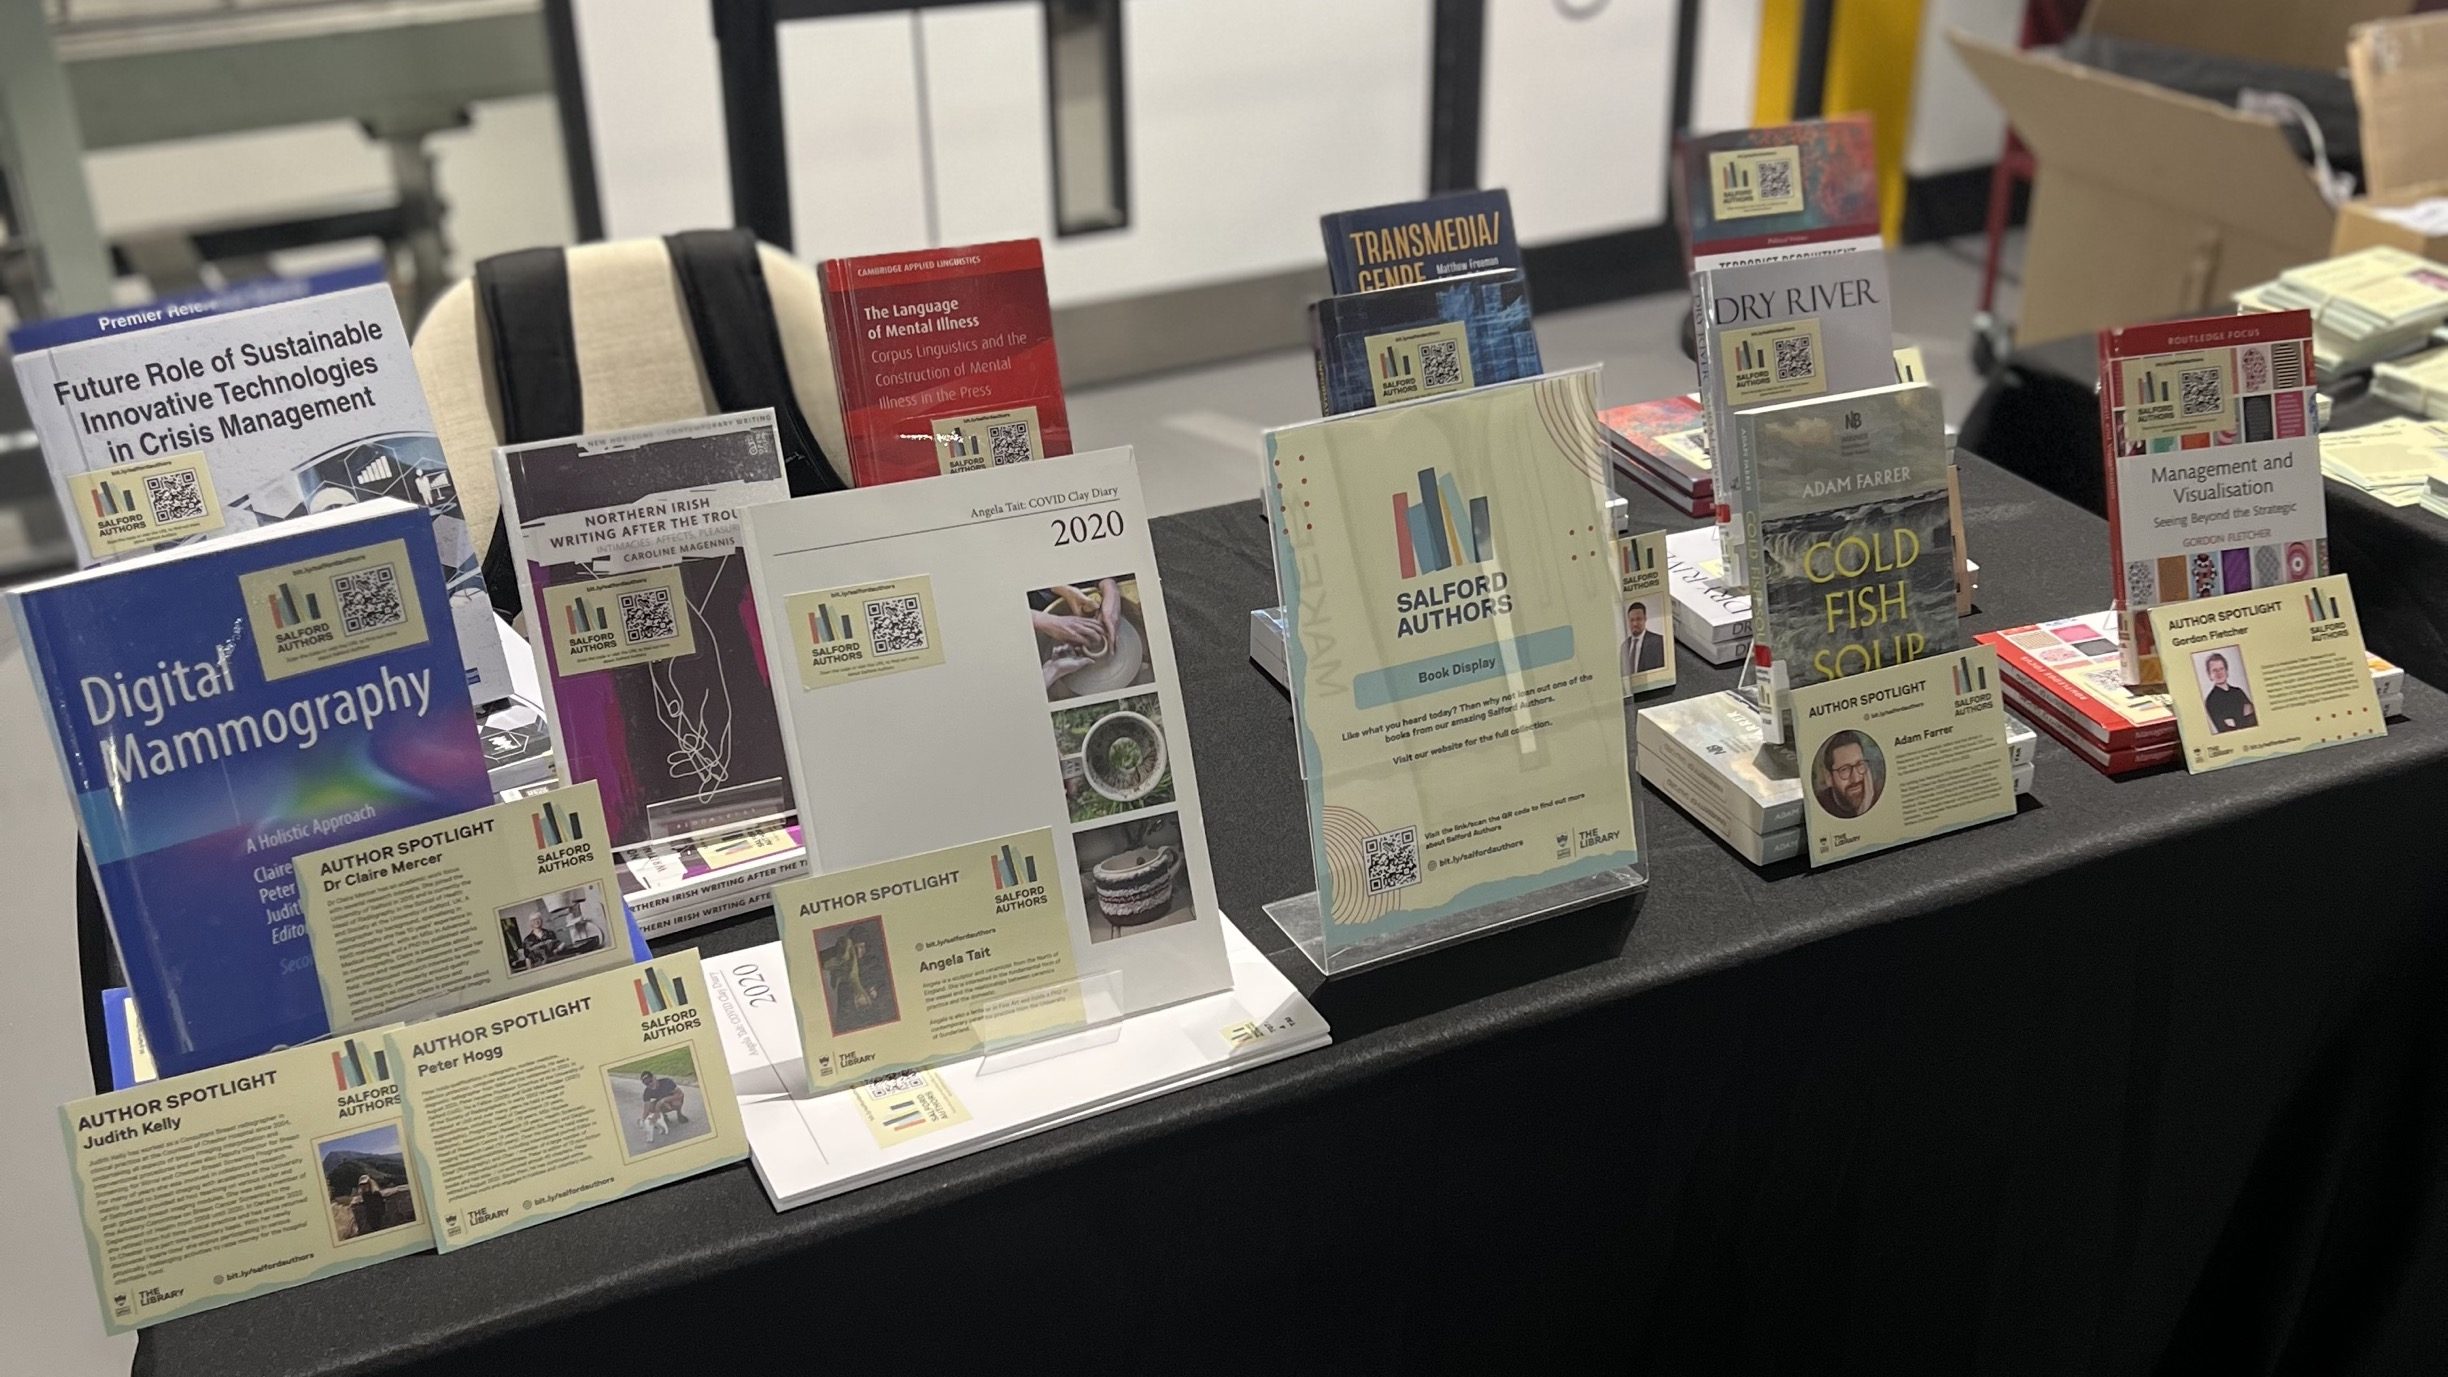 Salford Authors display of books and Author Spotlight cards